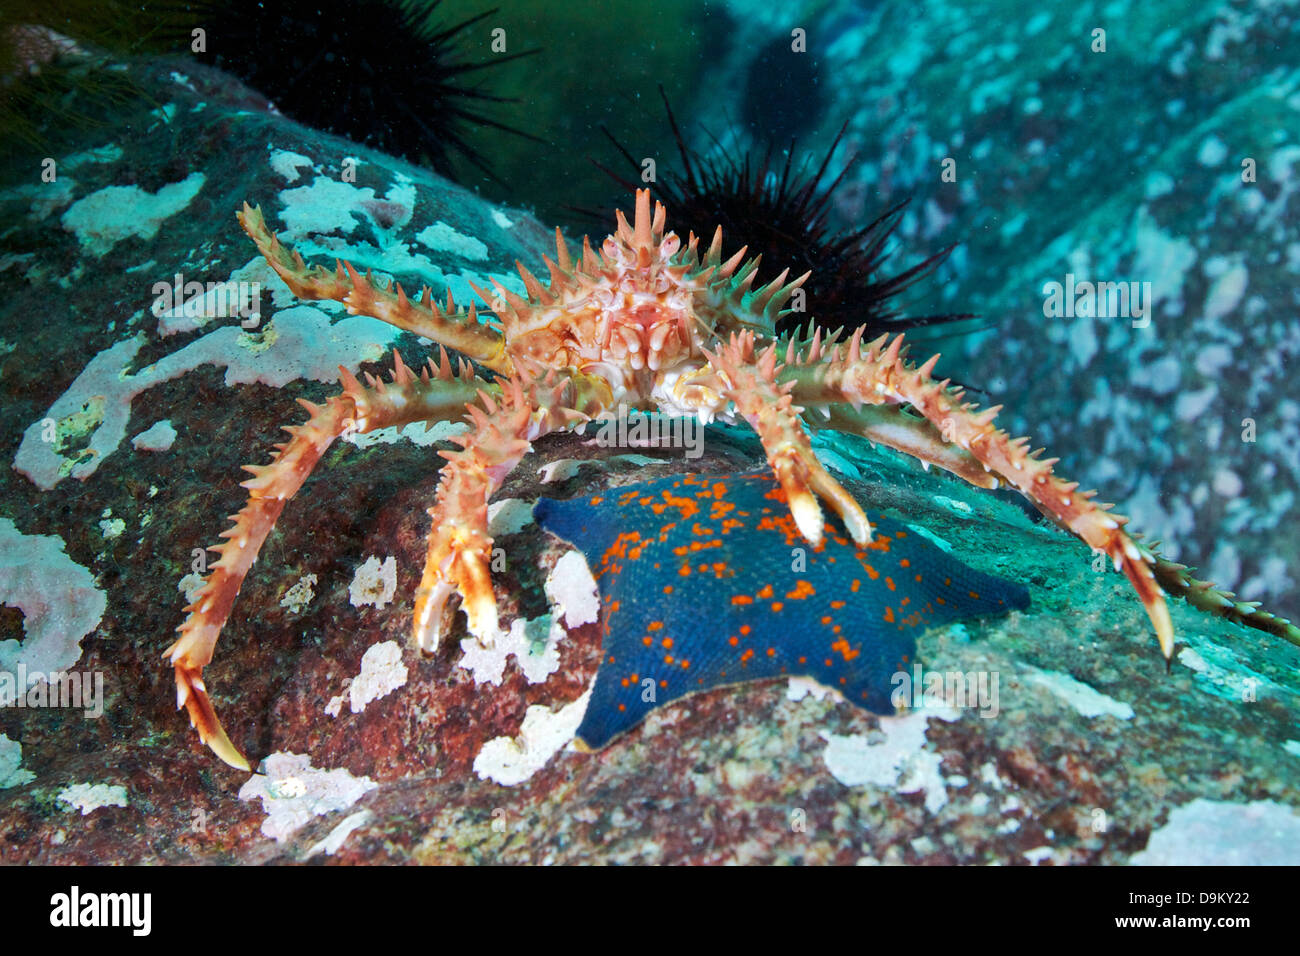 Red King Crab (Paralithodes camtschaticus) and a sea star, Sea of Japan Stock Photo